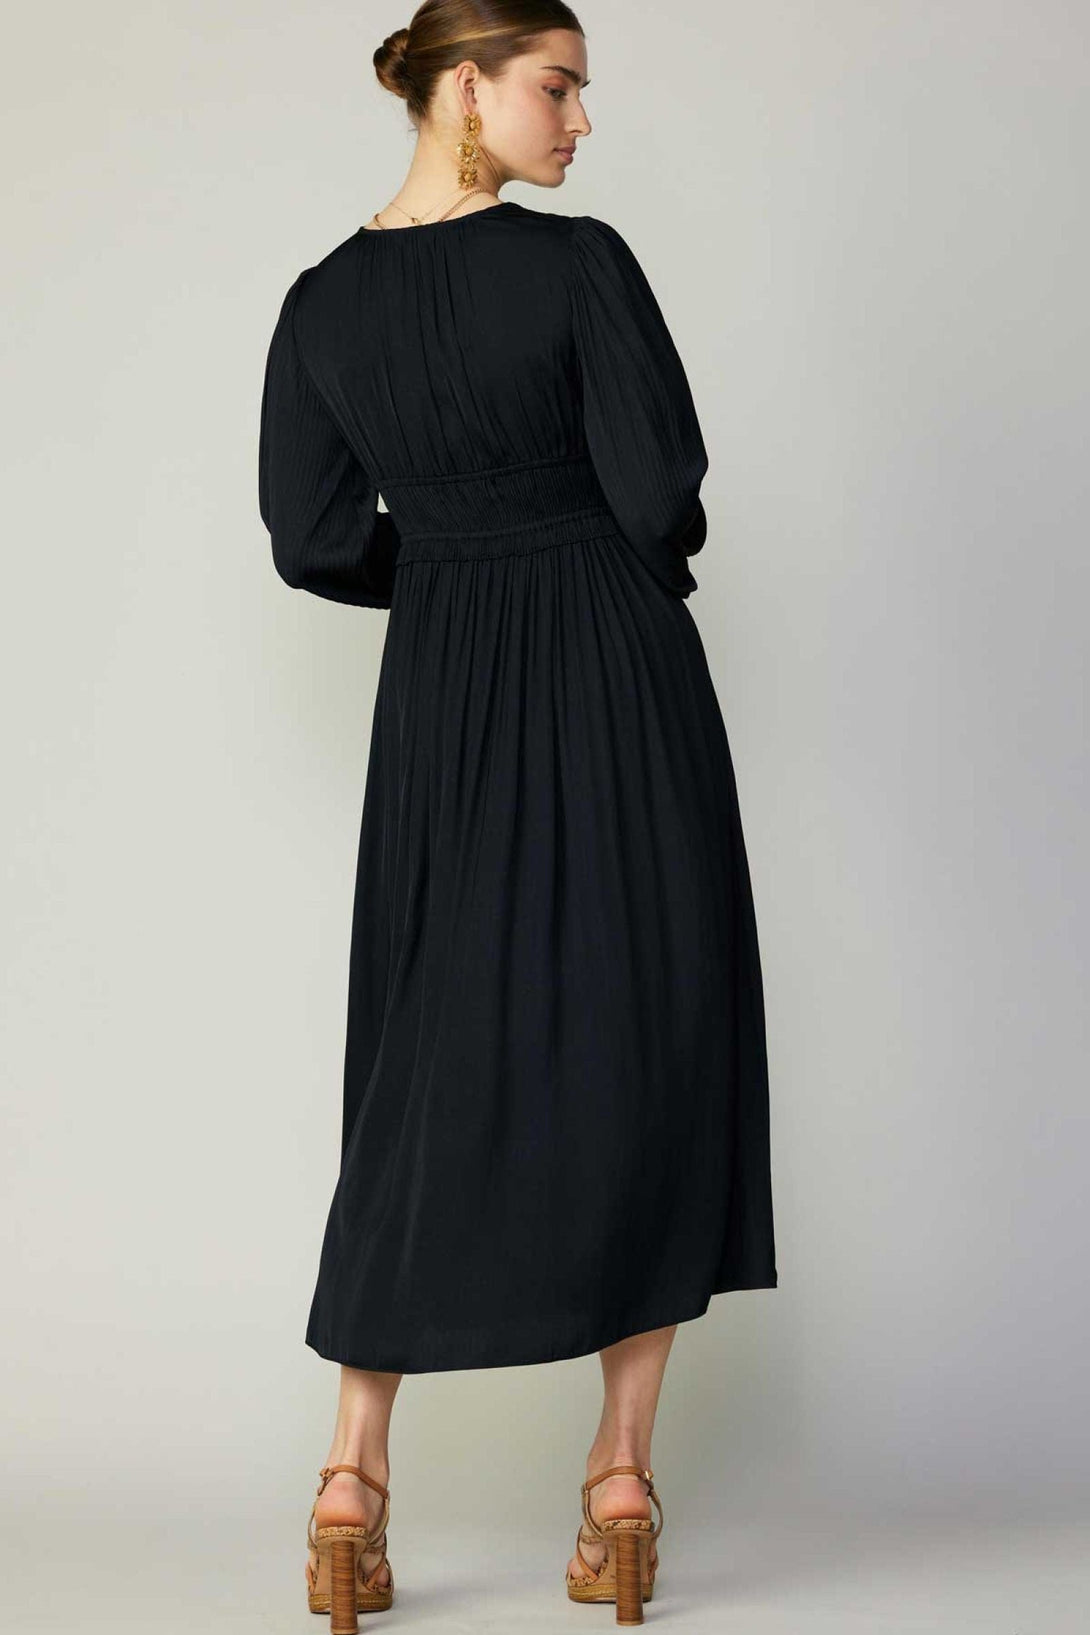 Current Air Ethereal Long Sleeve Dress